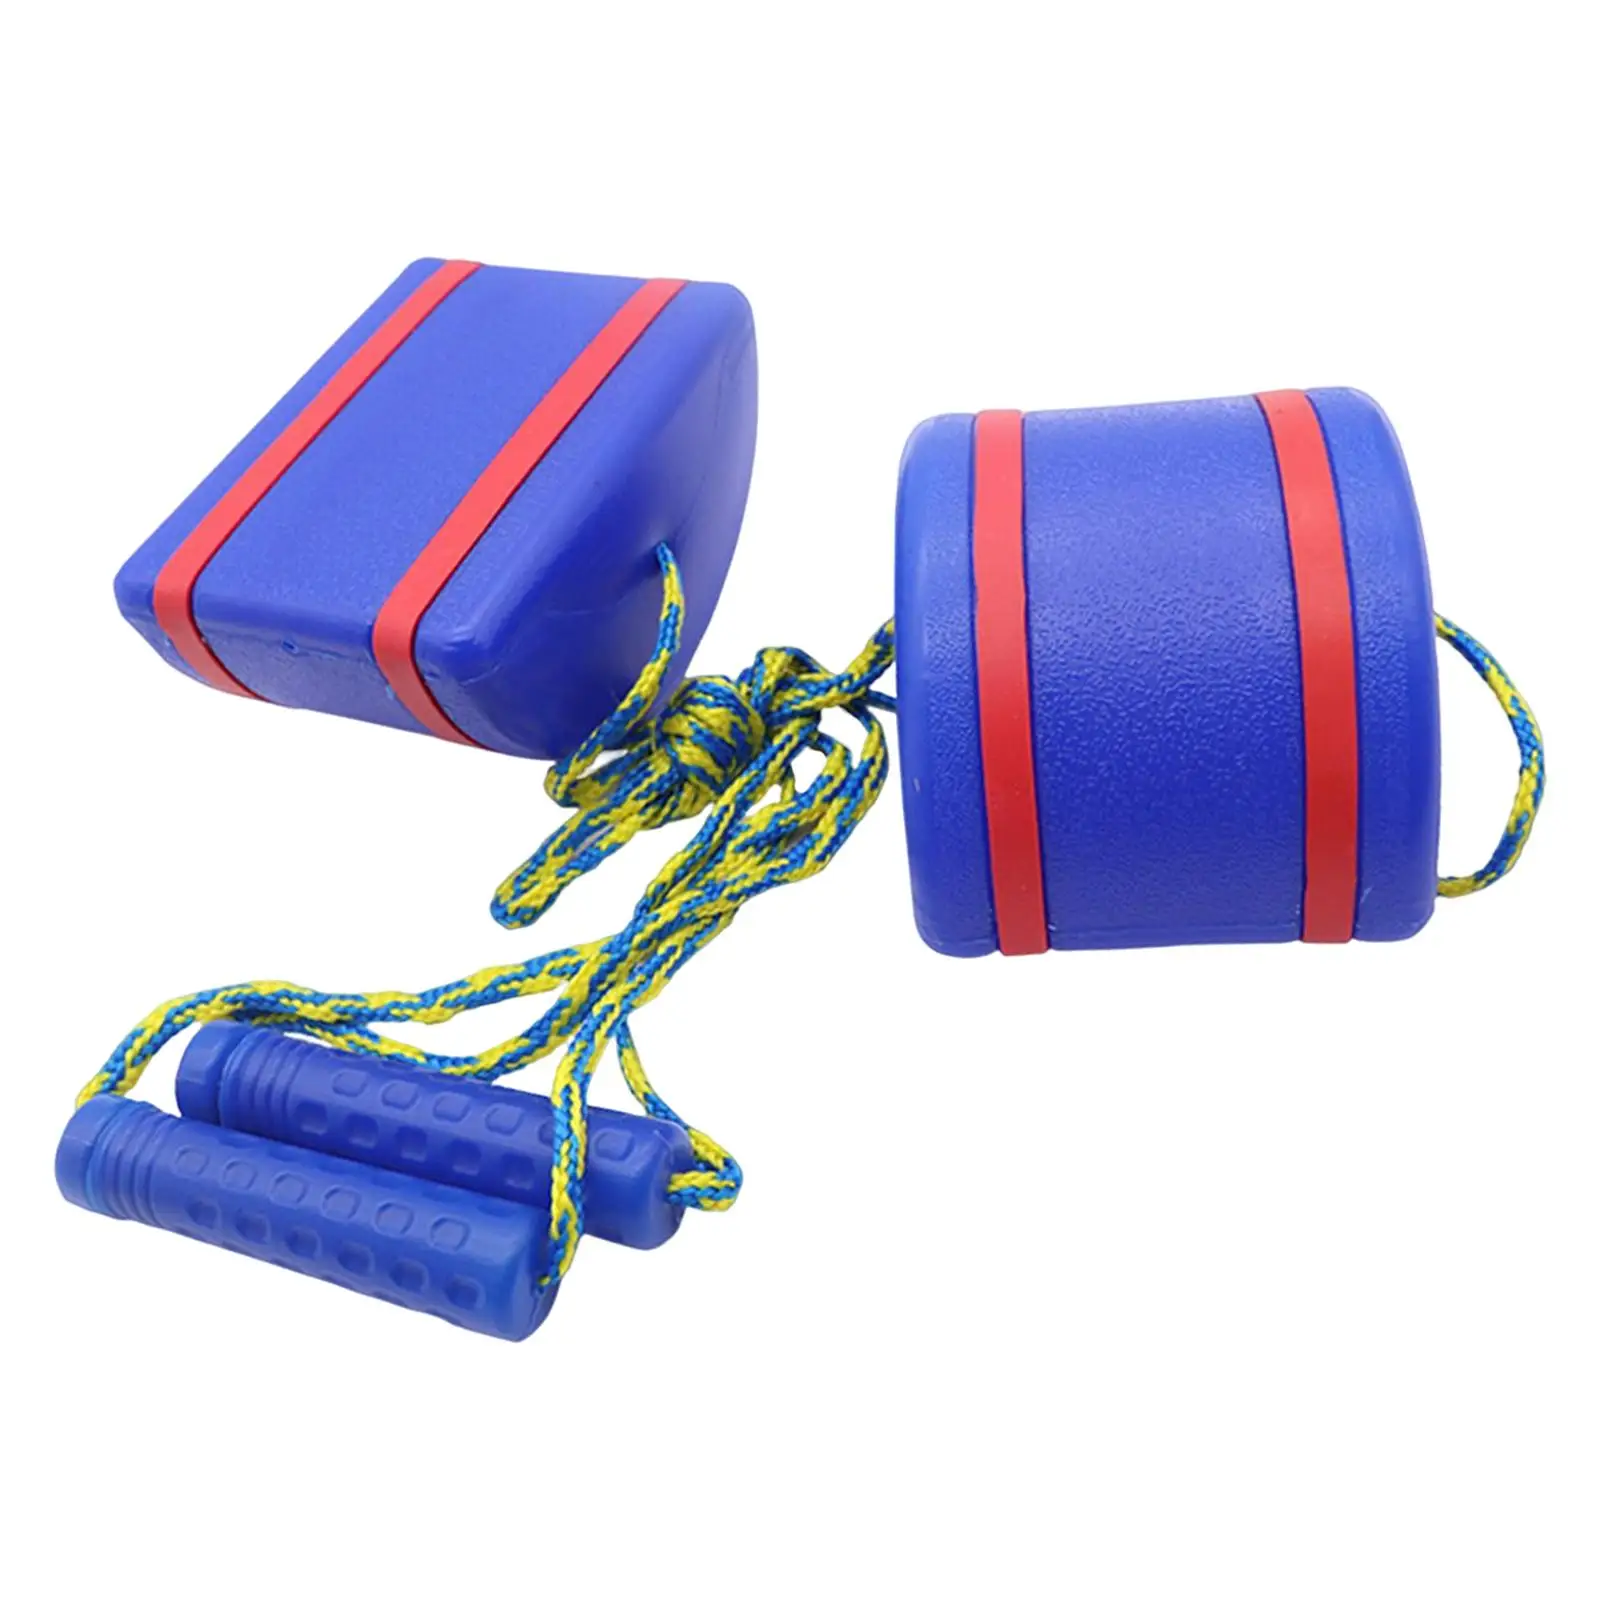 2Pcs Children Feet Toys Stepping Stone Toy River stone for Exercise Activities